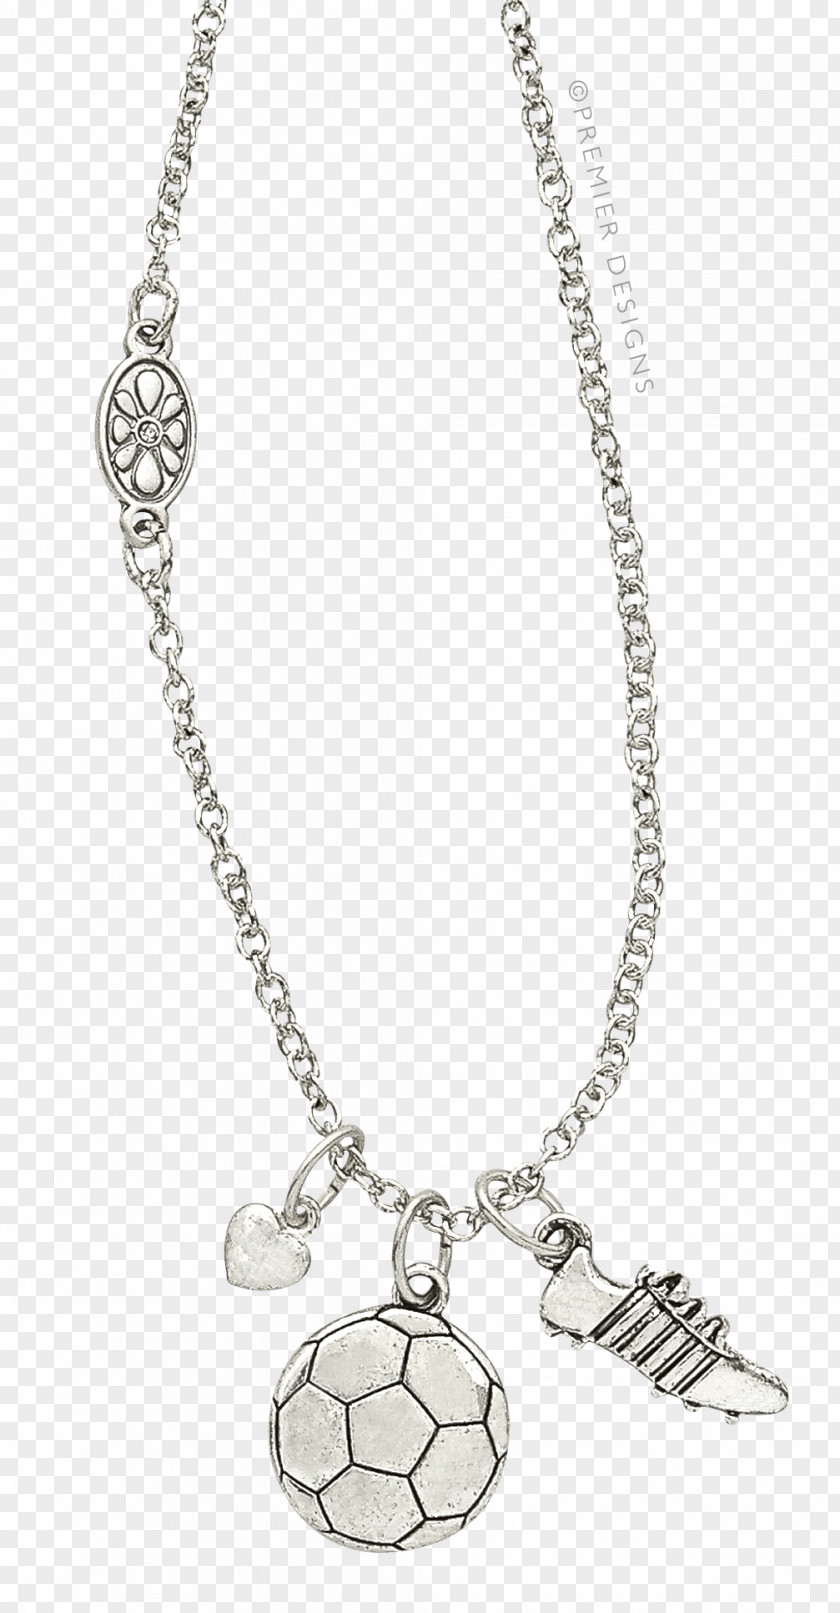 Jewelry Model Locket Jewellery Necklace Silver Chain PNG